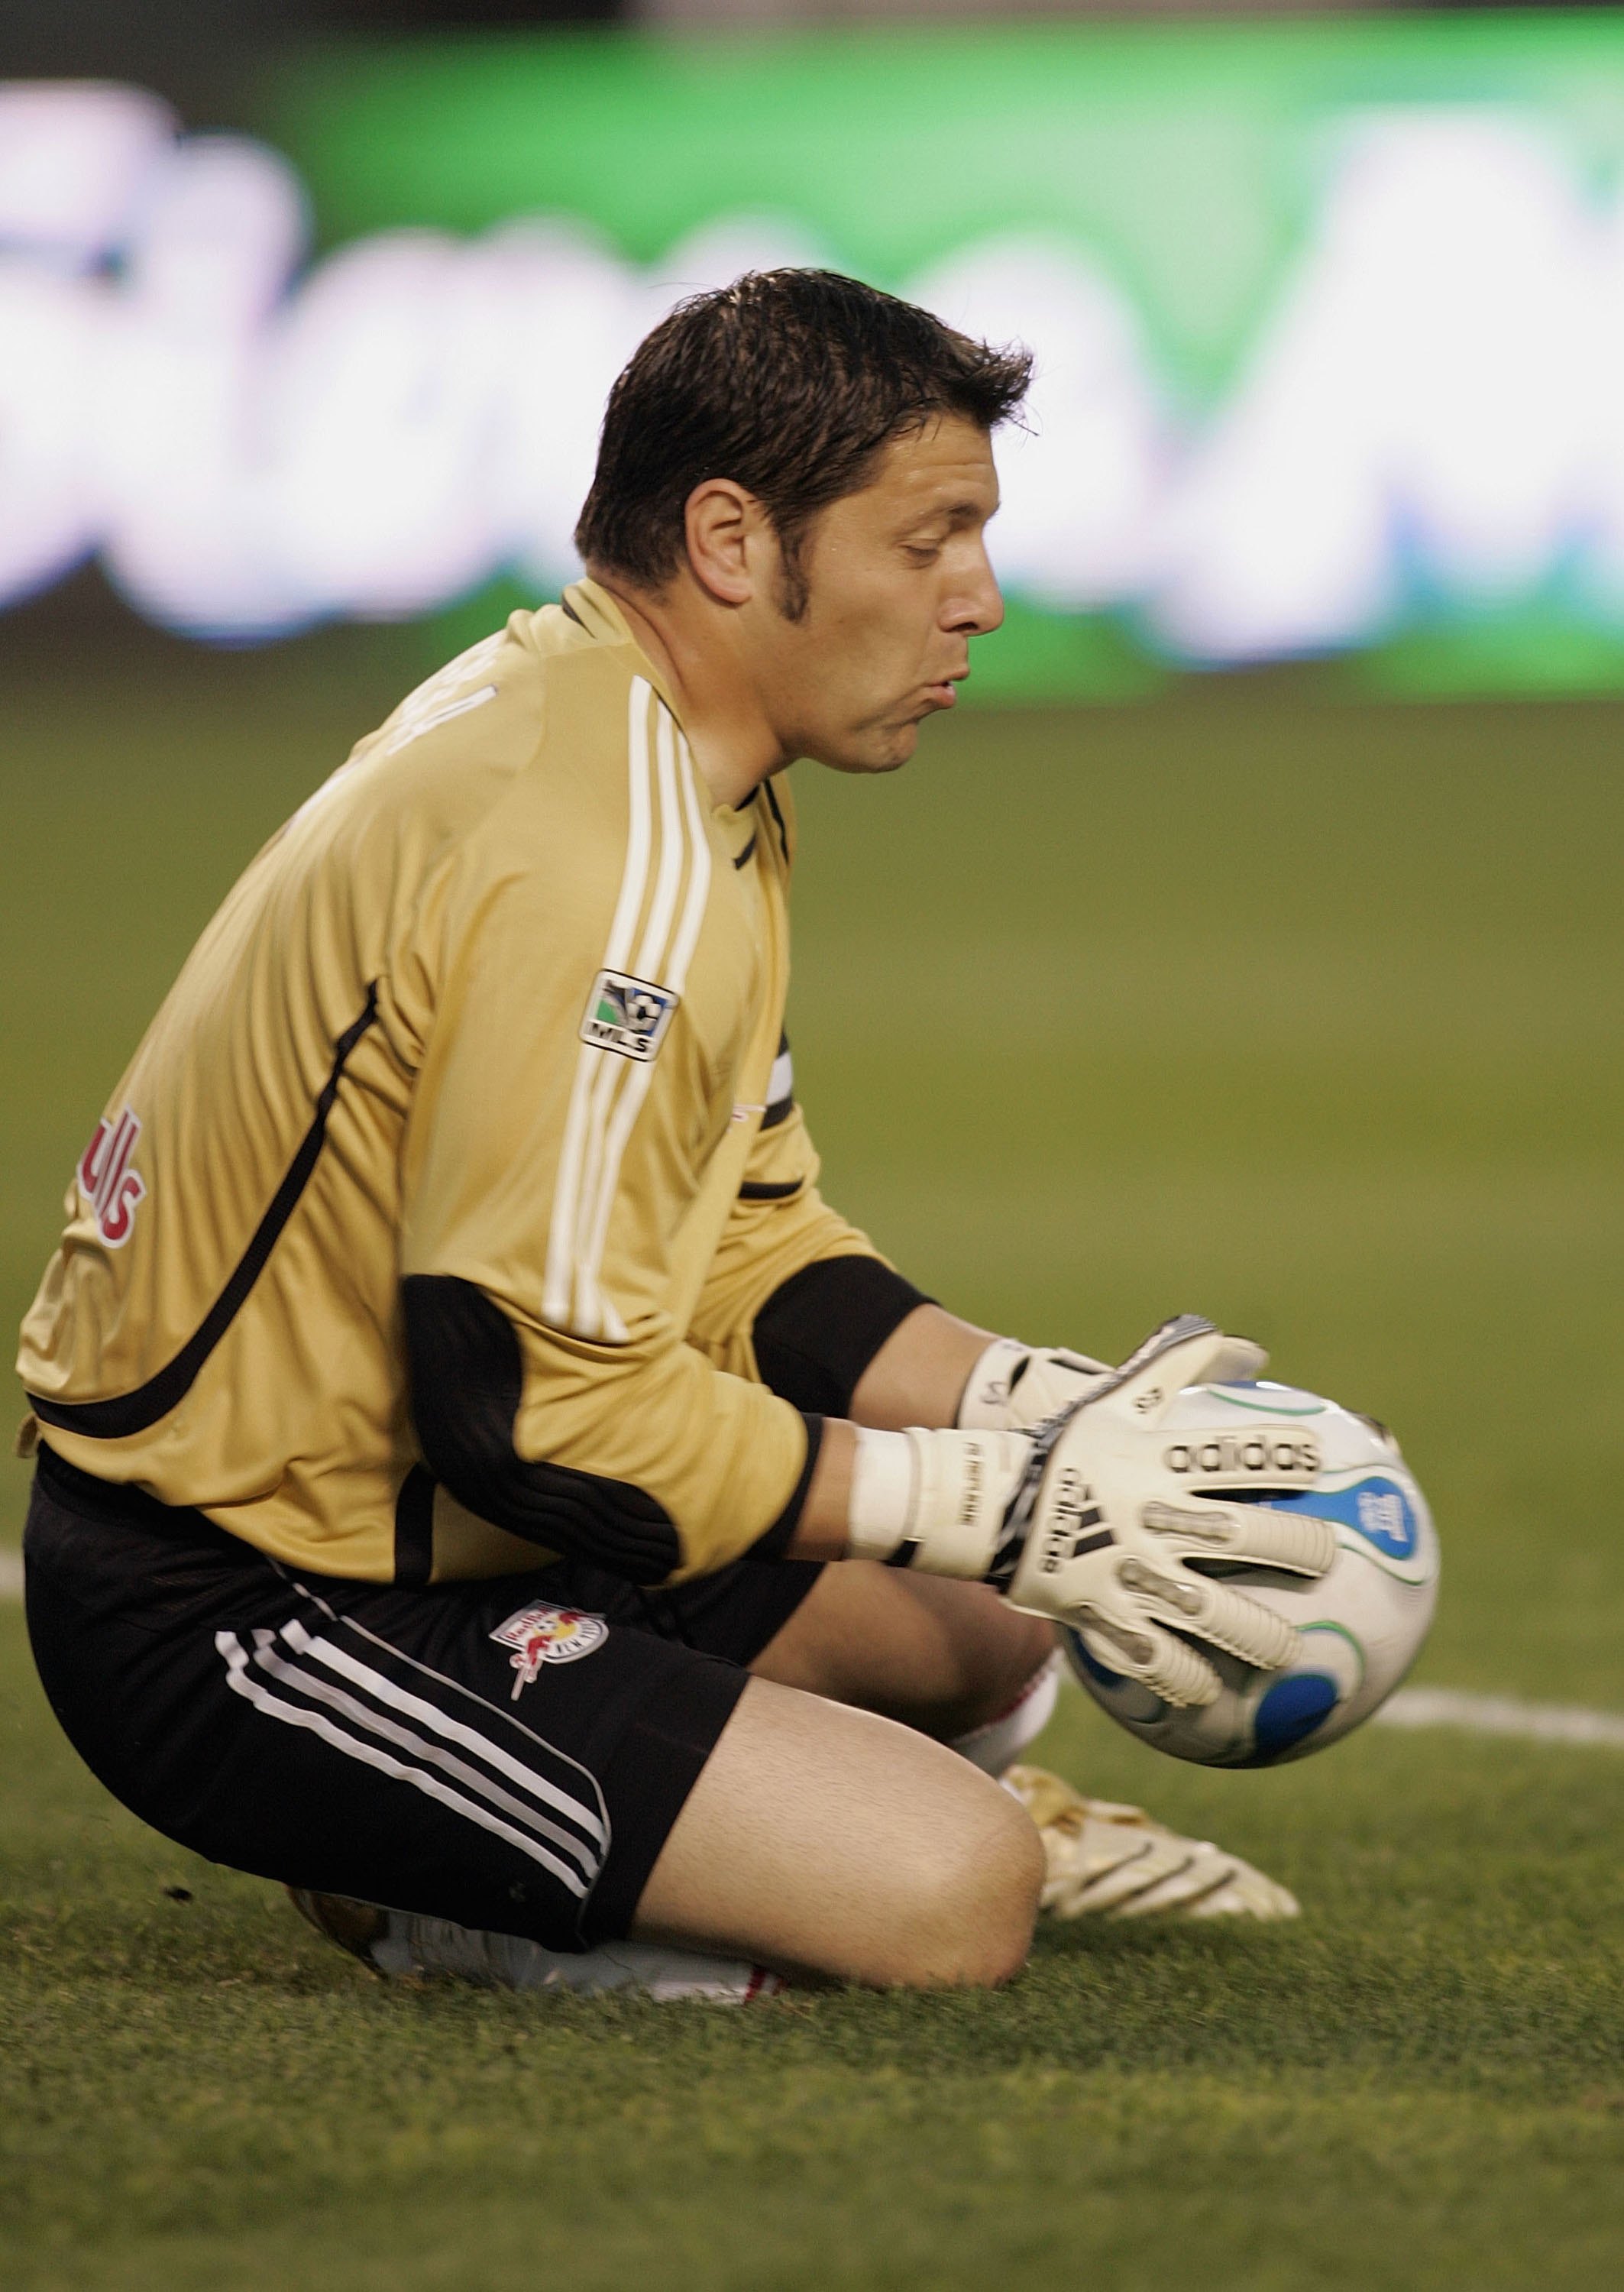 CARSON, CA - APRIL 29:  Goalkeeper Tony Meola #1 of the New York Red Bulls makes a save in the first half against Chivas USA during their MLS game at Home Depot Center on April 29, 2006 in Carson, California.  (Photo by Victor Decolongon/Getty Images)